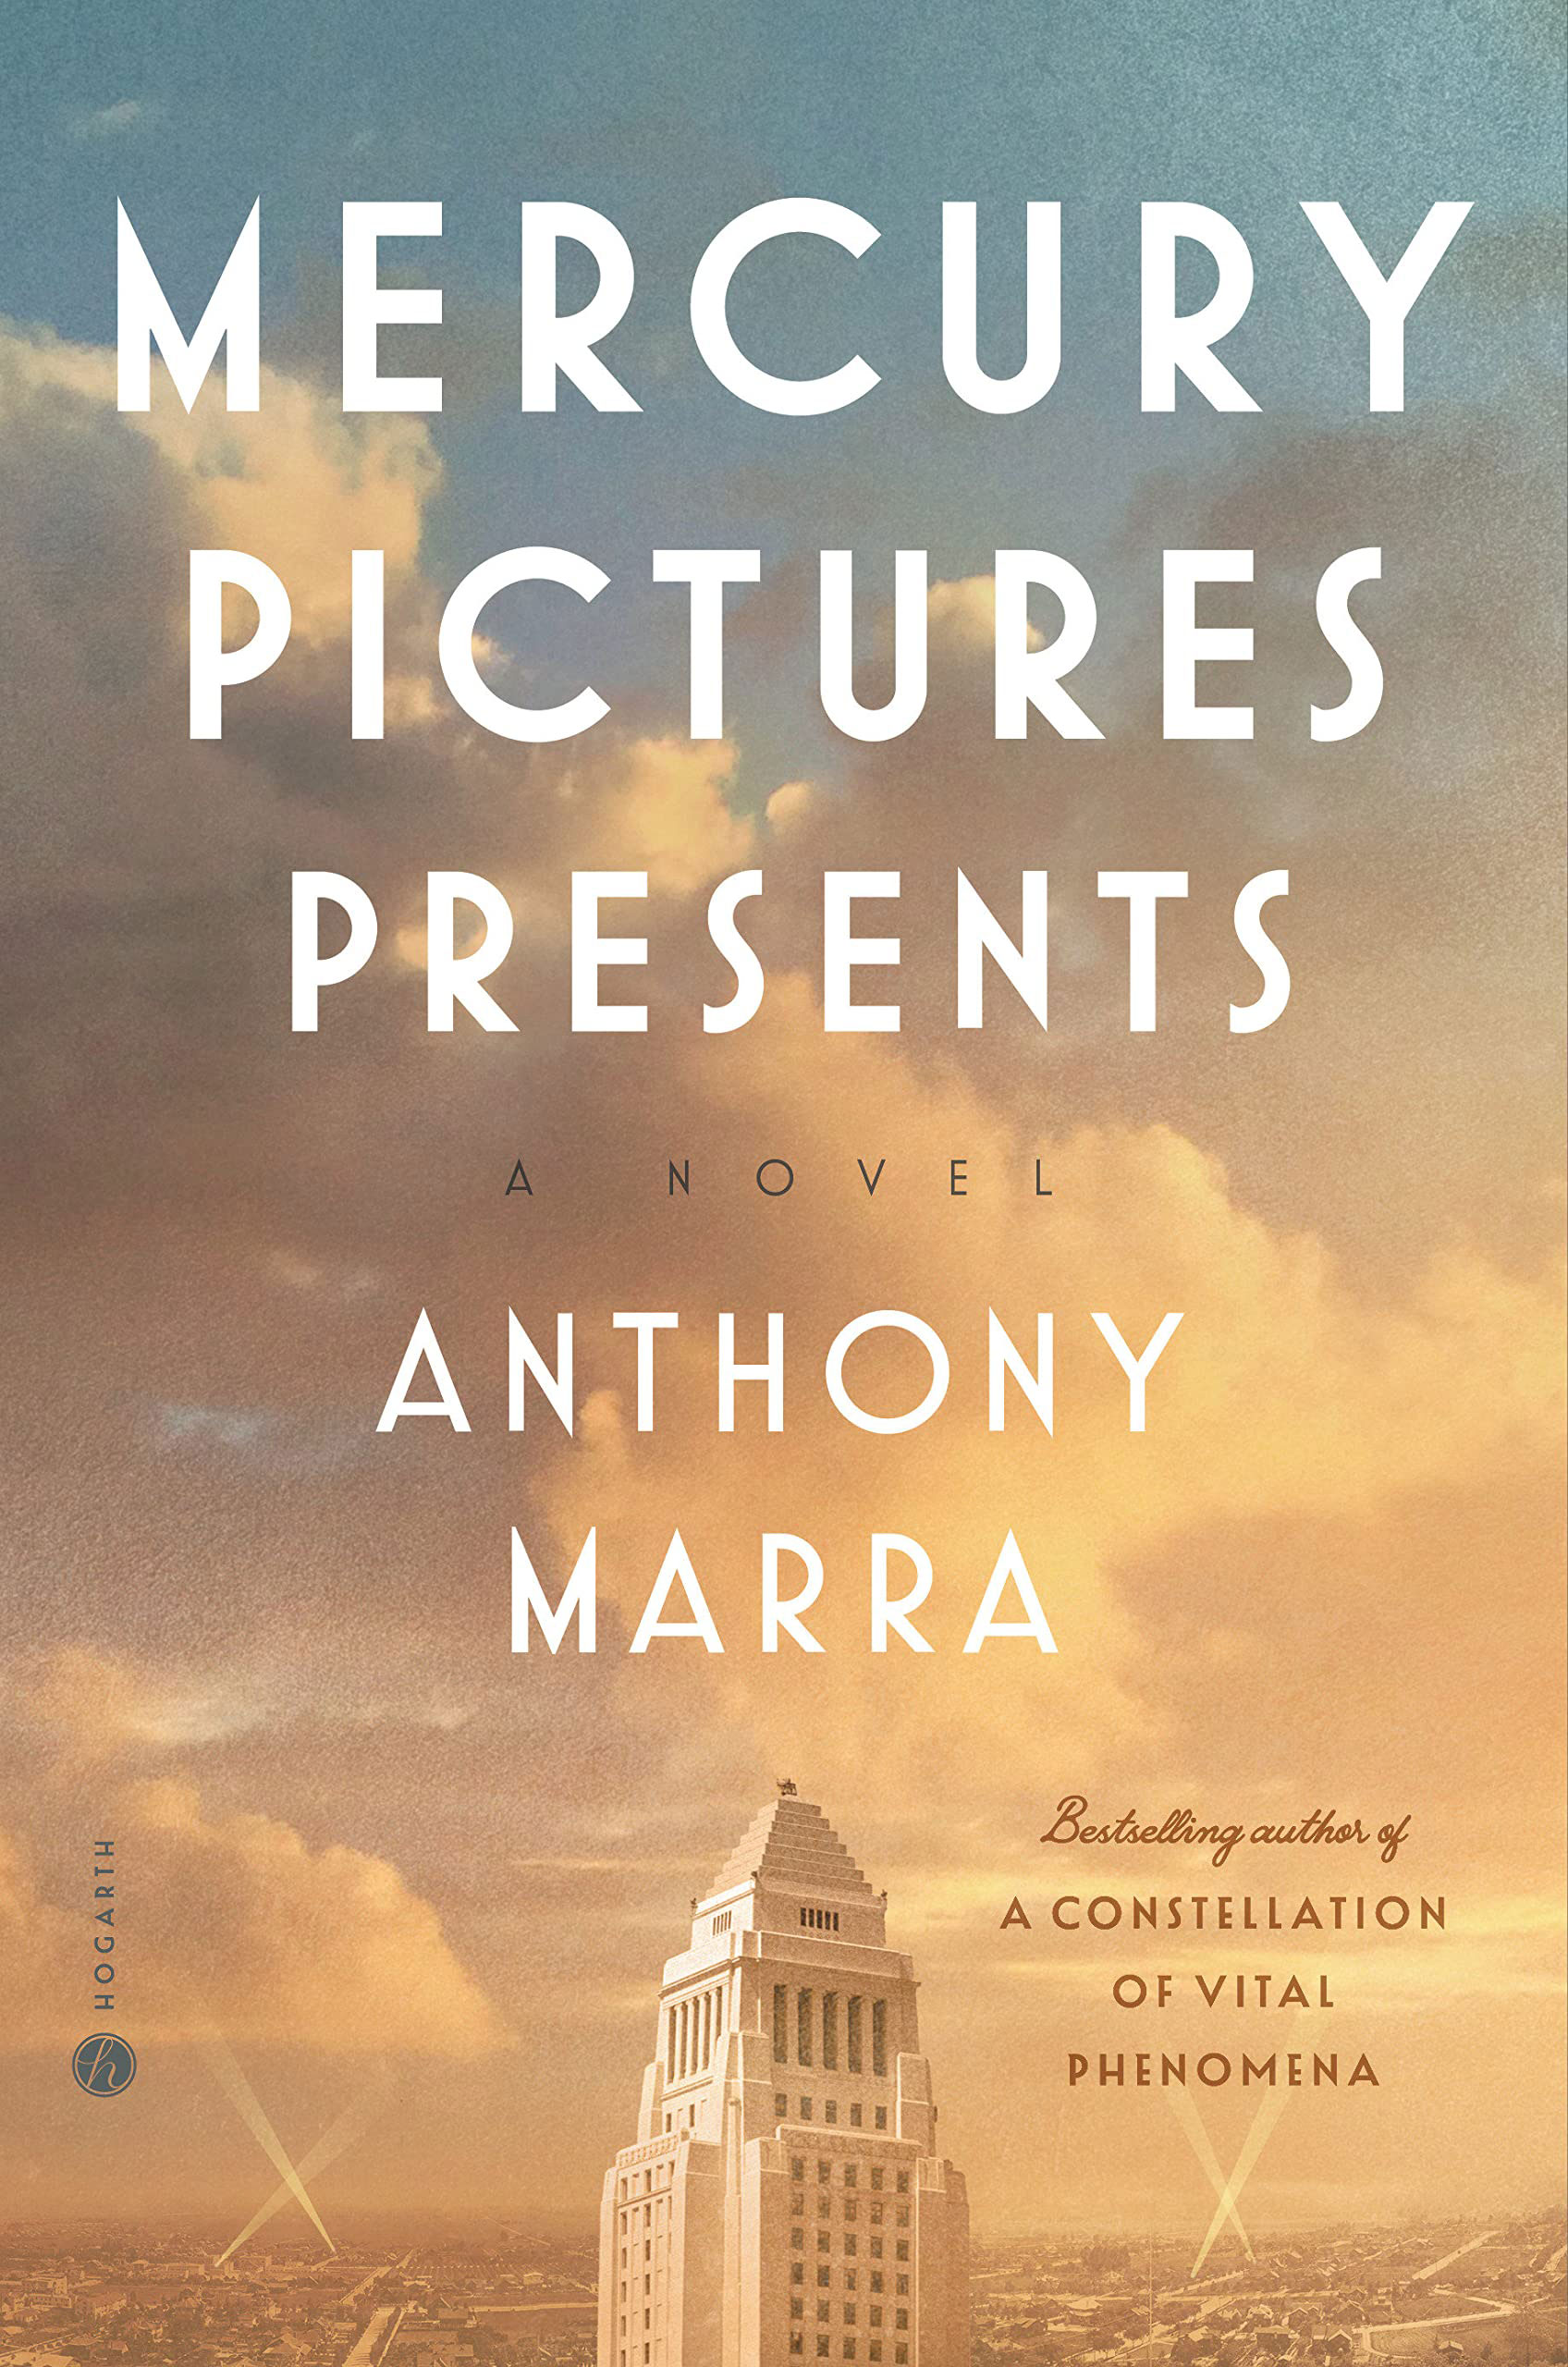 Mercury Pictures Presents book cover